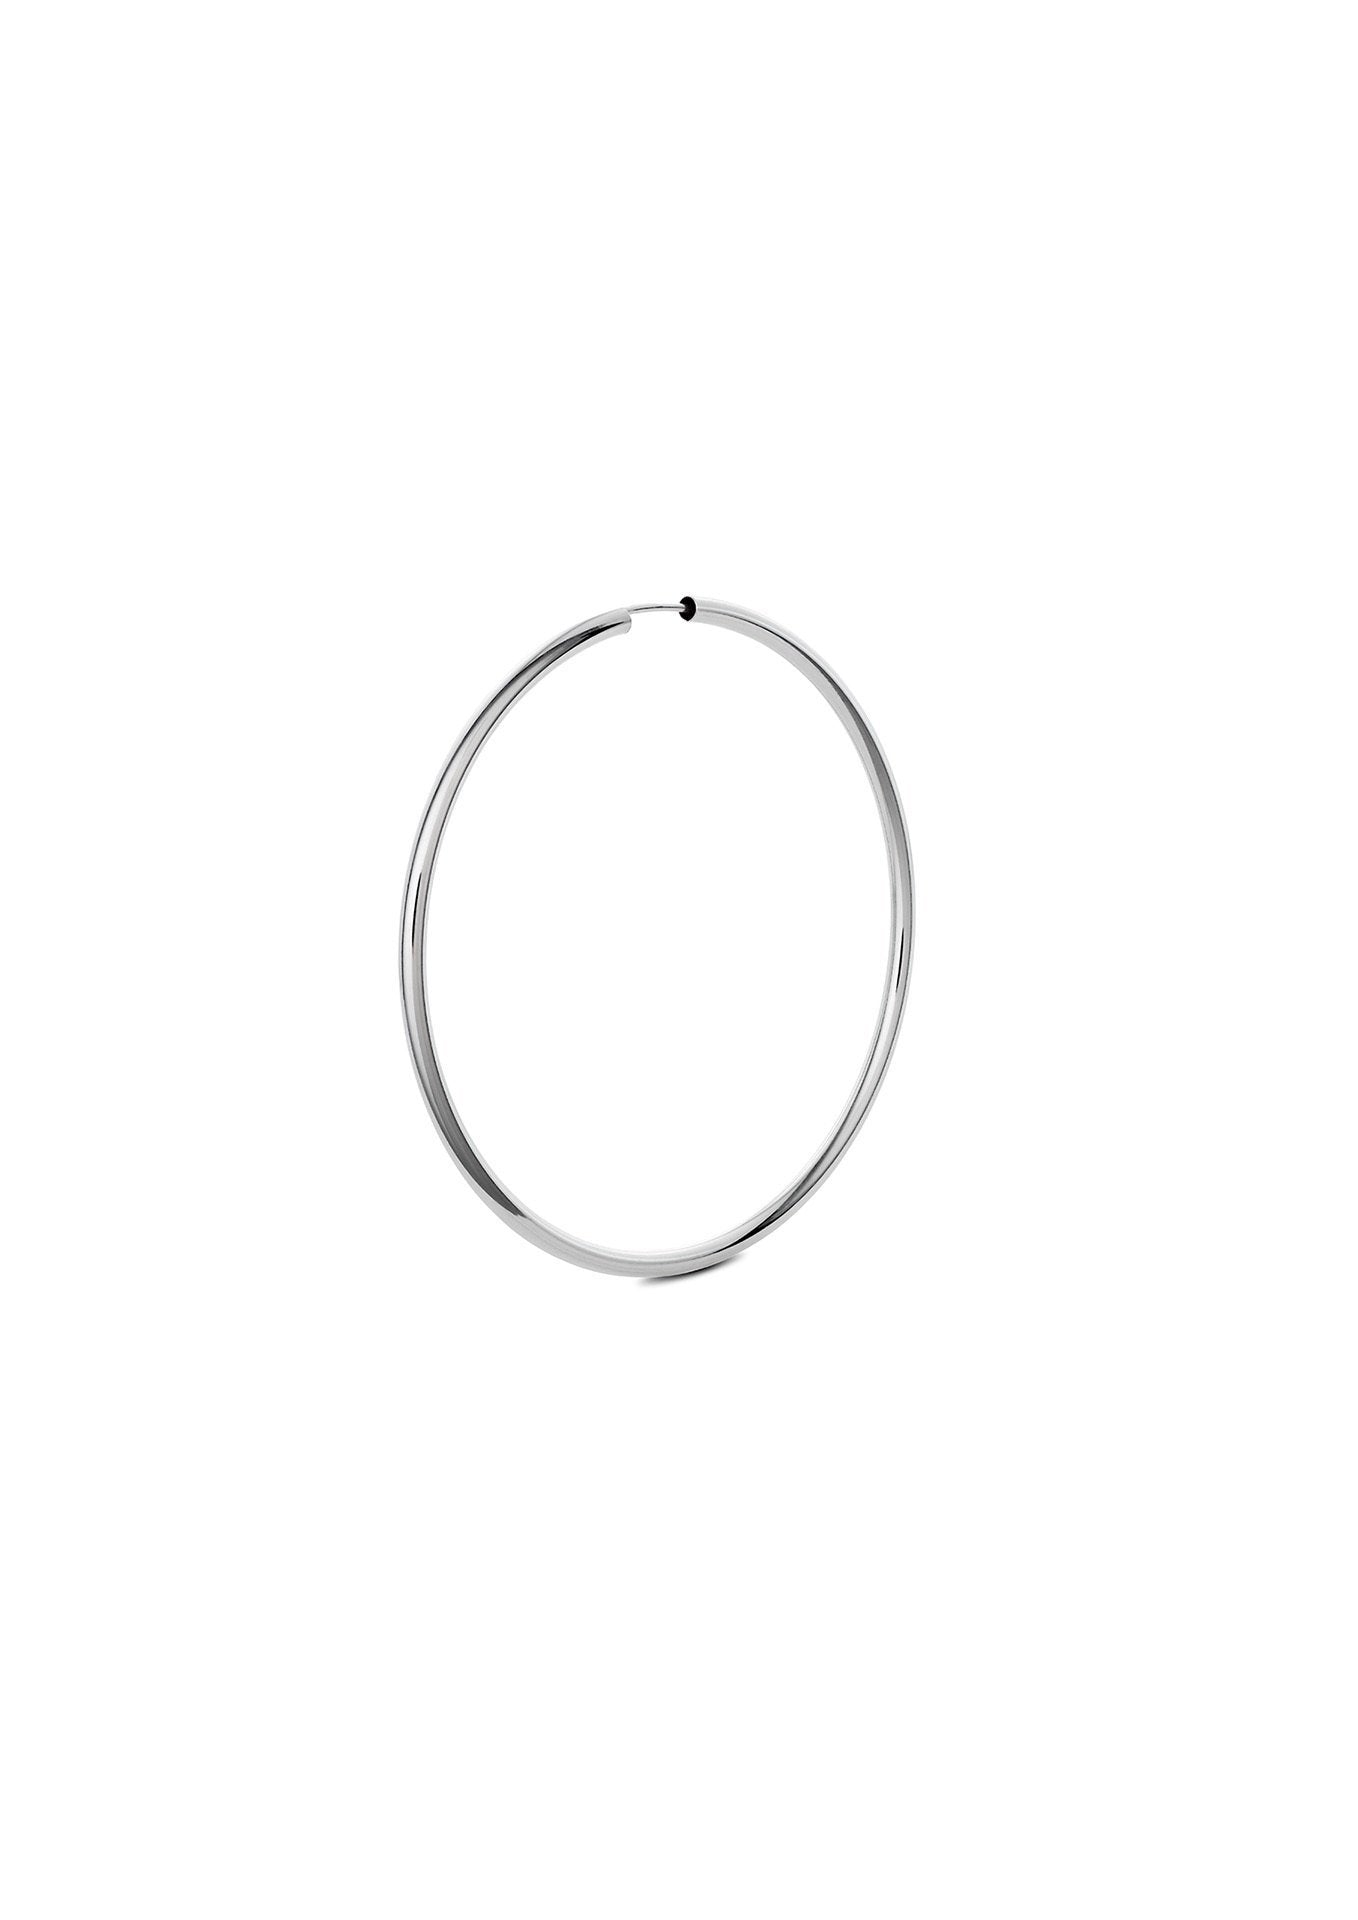 Nomad Hoops Silver, 60mm - NO MORE ACCESSORIES